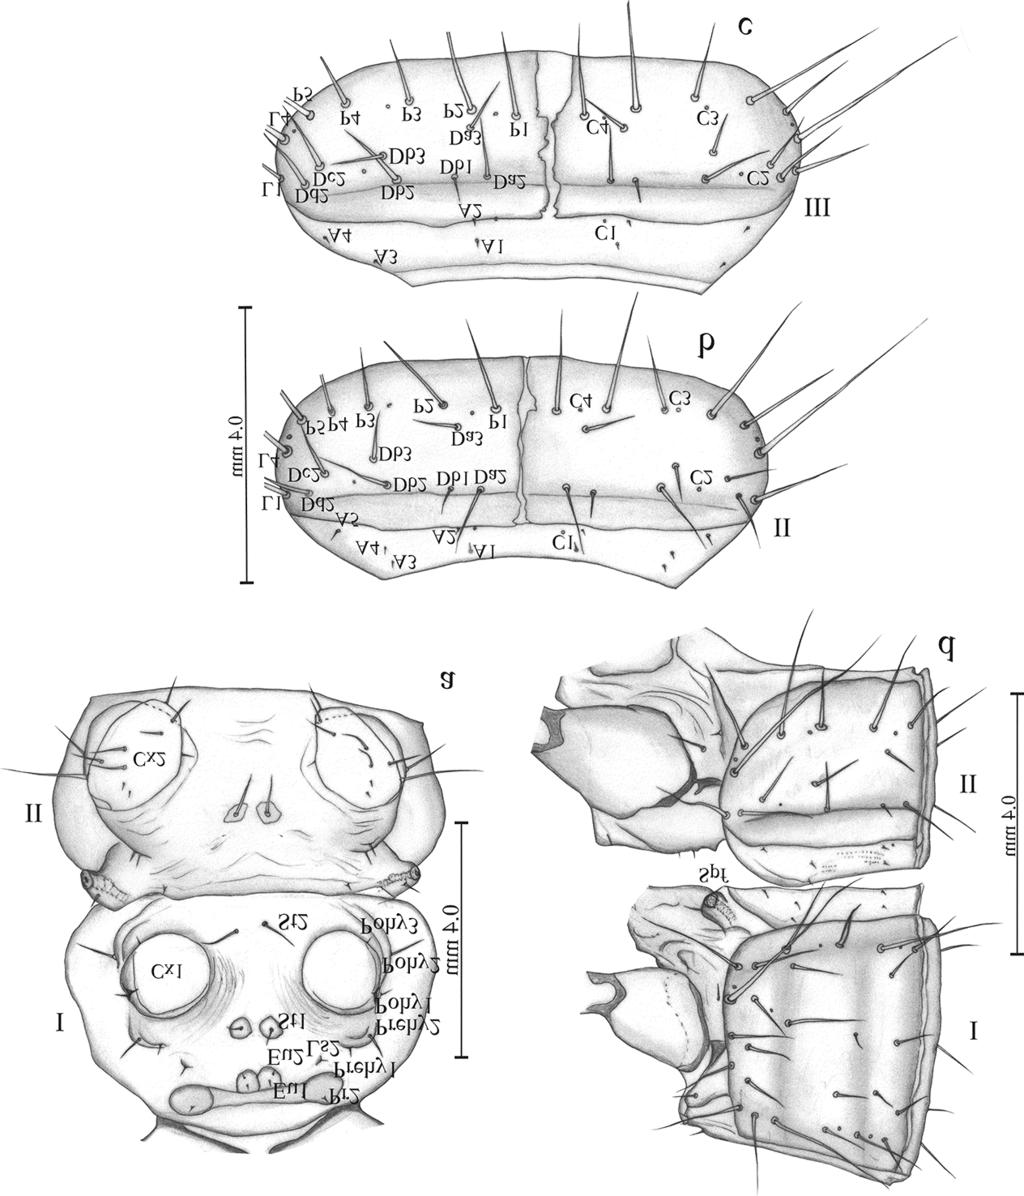 Fig. 6. Mature larva of H. picipennis. a.thoracic segment I and II in ventral view. b. Mesonotum. c. Metanotum. d. Thoracic segments I and II in lateral view.